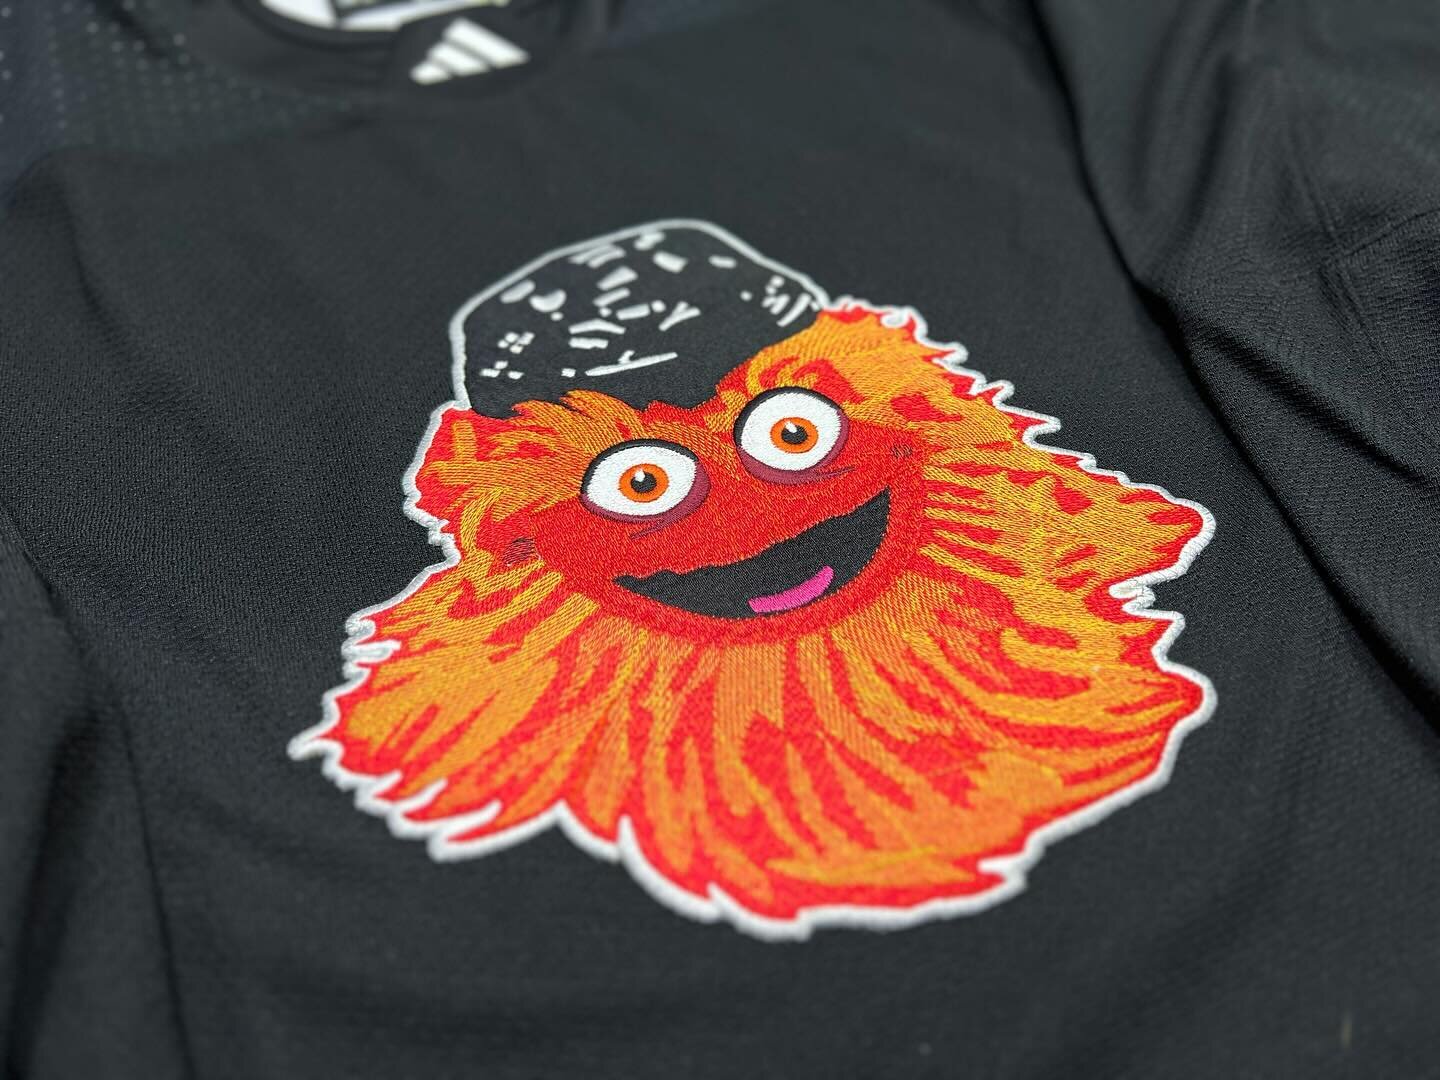 If you stare long enough into Gritty&rsquo;s eyes, they say you may find them staring back into you. 

Merry Gritmas! This custom practice jersey features the best mascot in hockey, @grittynhl and is adorned with matching @philadelphiaflyers shoulder